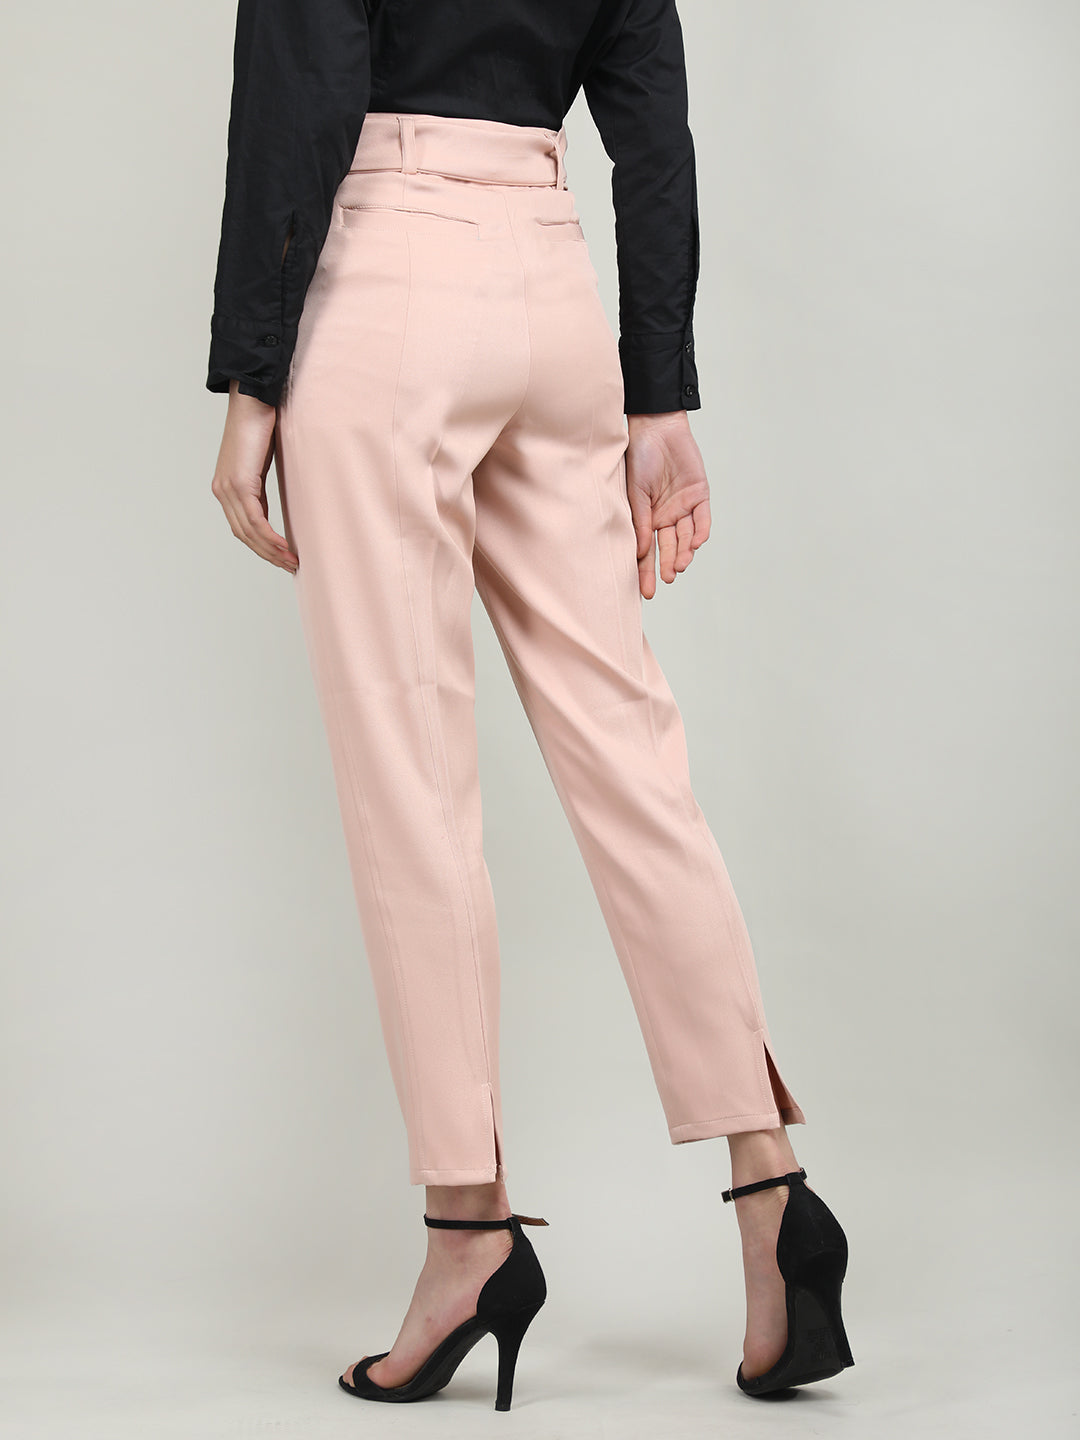 Women Solid Baby Pink Cotton Pencil Pant